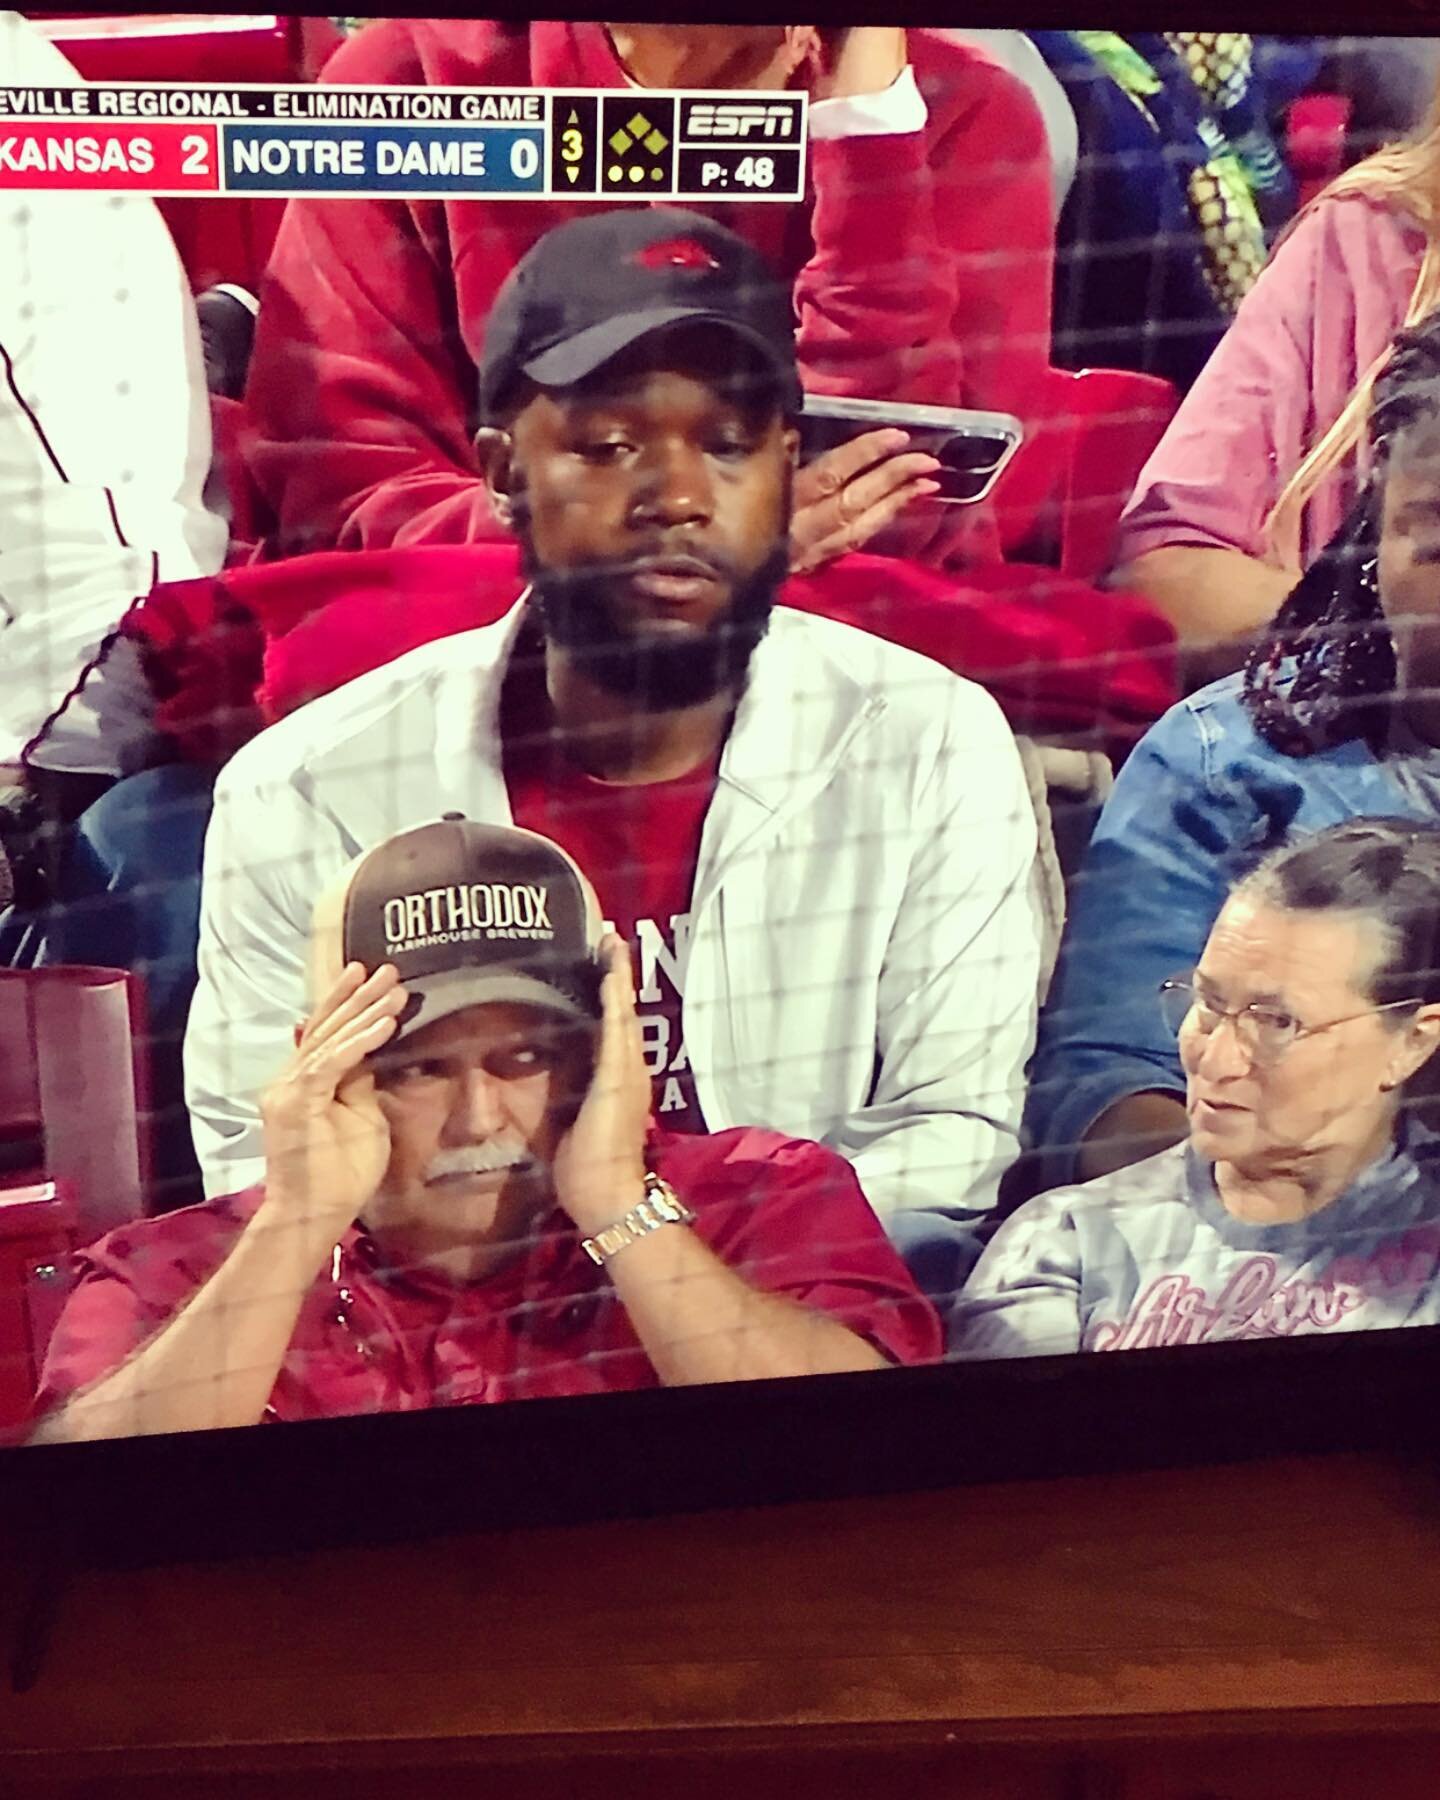 Seeing our brewery merch on ESPN was fun! We don&rsquo;t know who this man is, but if you see this, come by for a beer on us. WoooPig!🍻